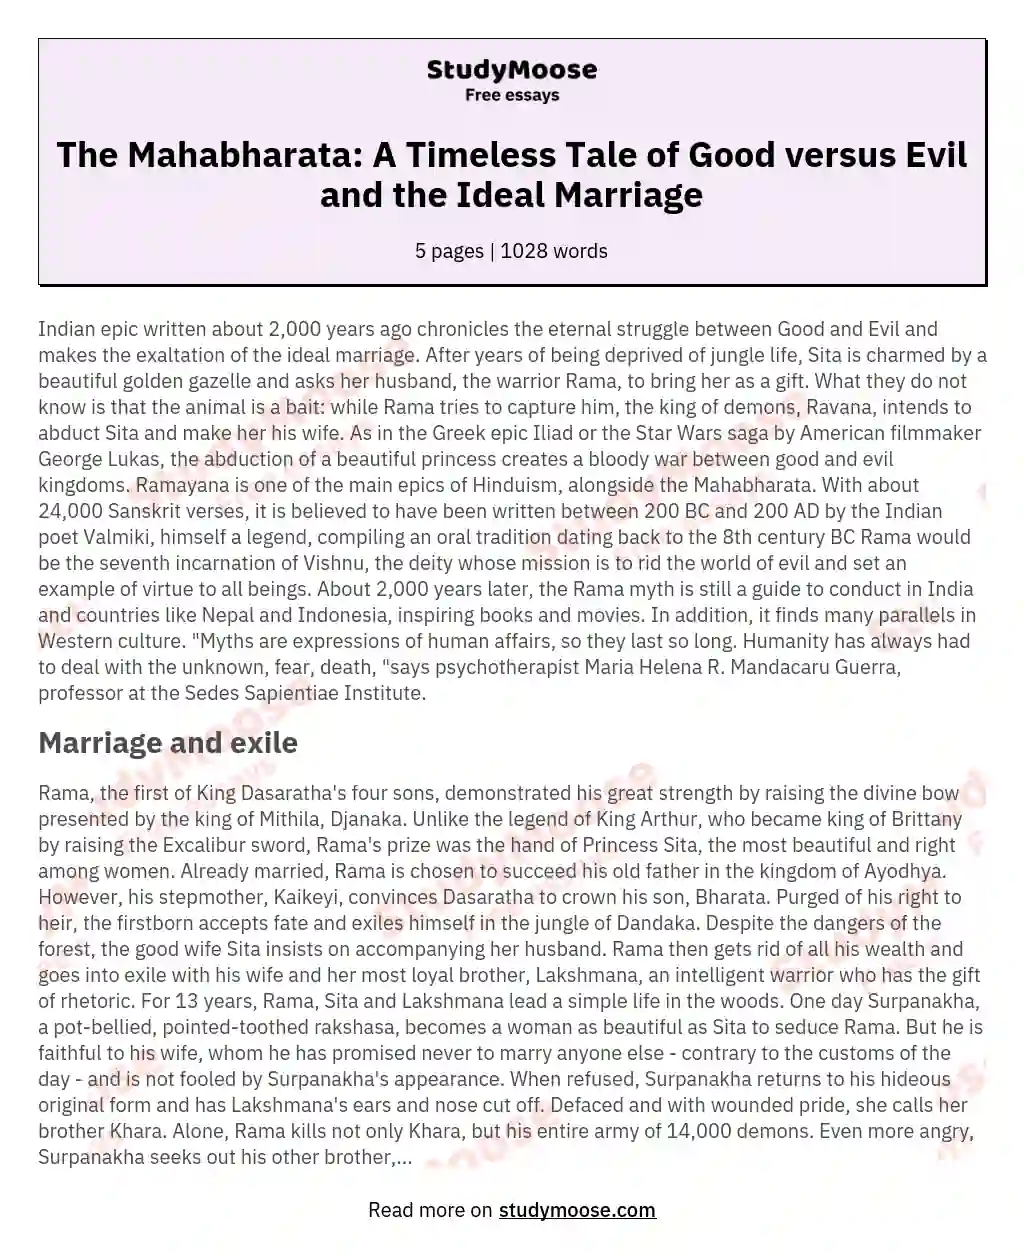 The Mahabharata: A Timeless Tale of Good versus Evil and the Ideal Marriage essay